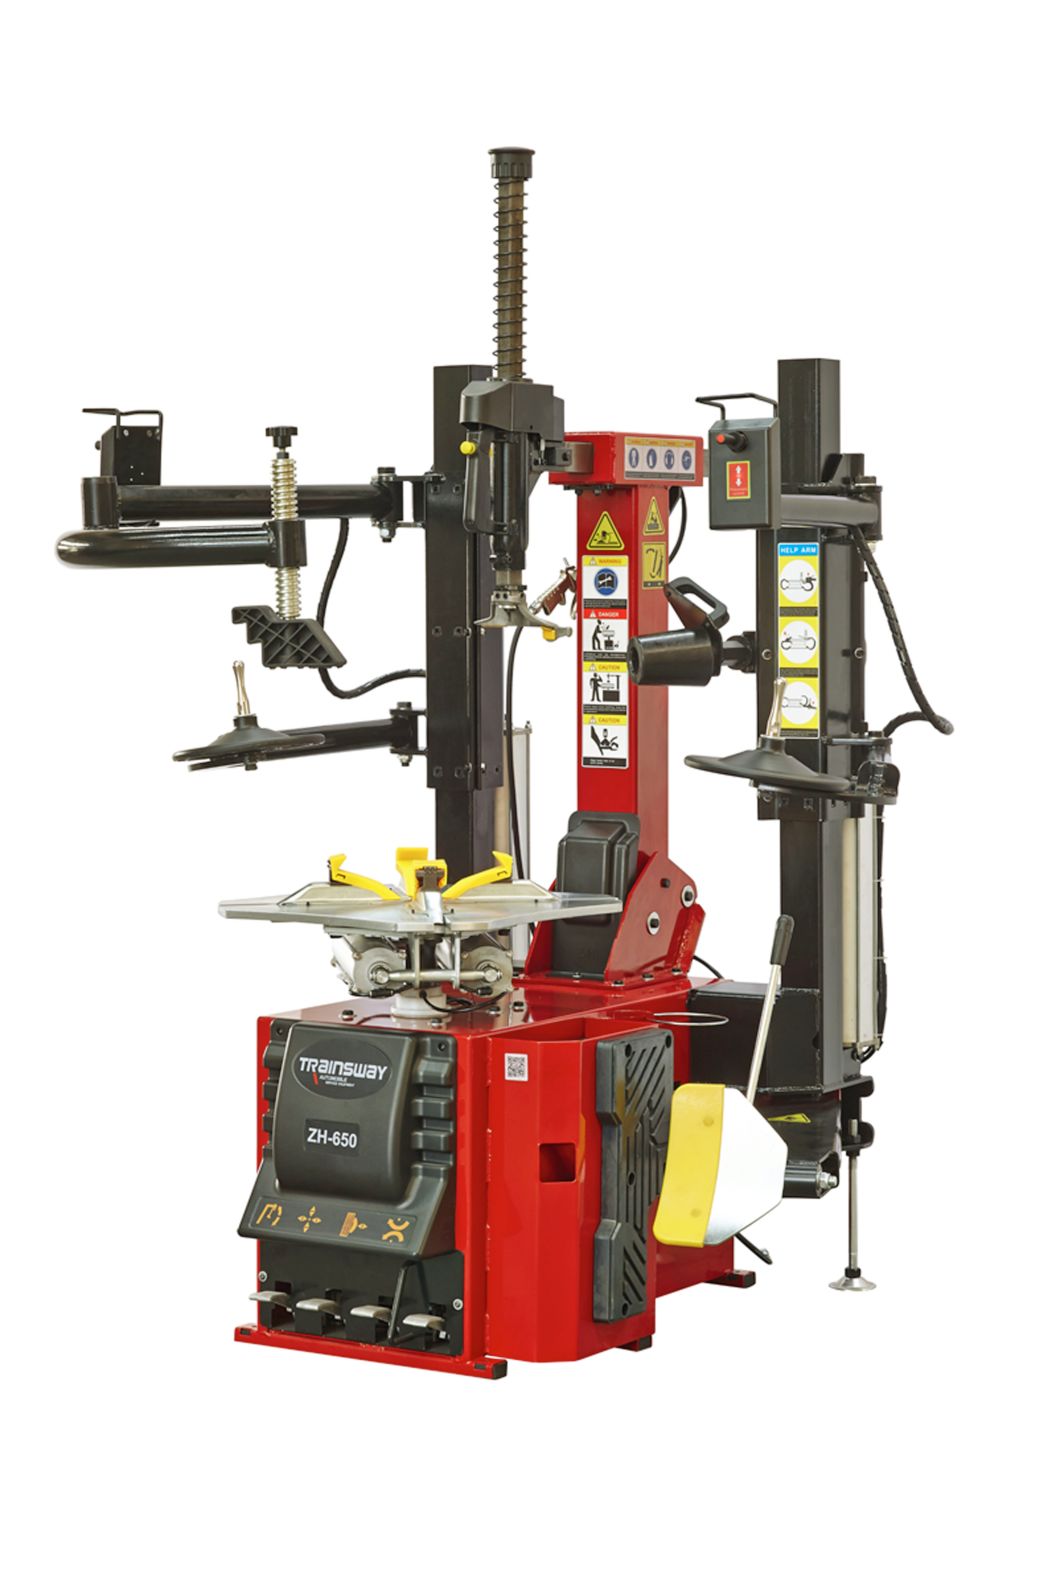 Trainsway Tire Changer Zh650s Pneumatically Operated Tilting Column with Dual Arms